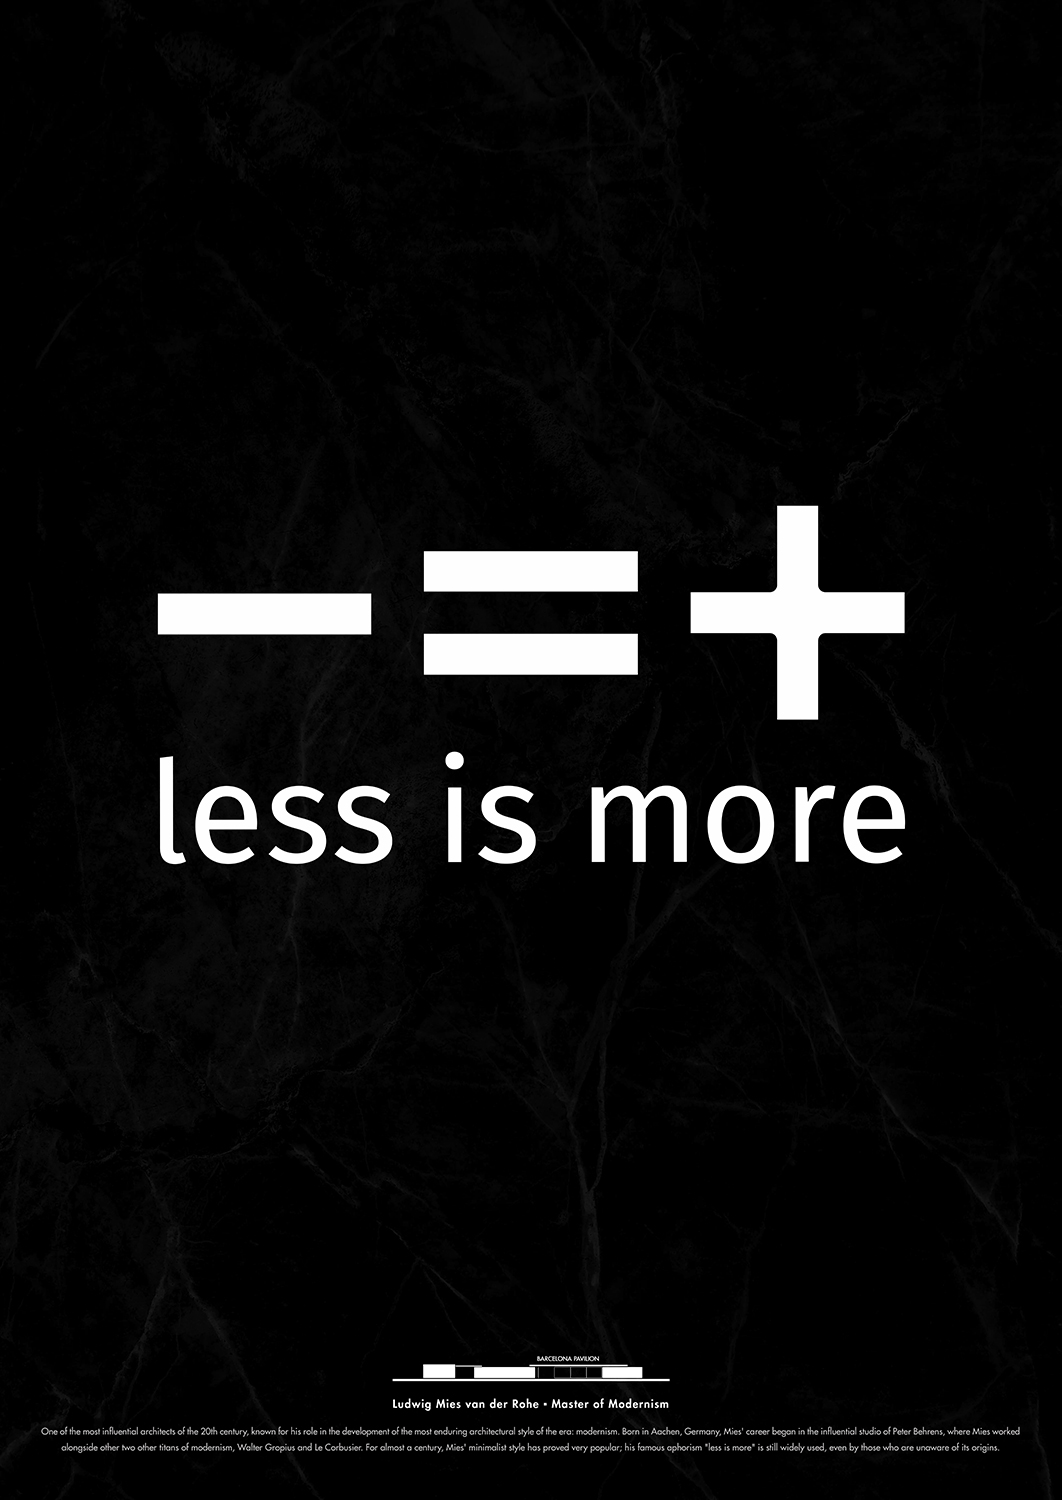 More less is